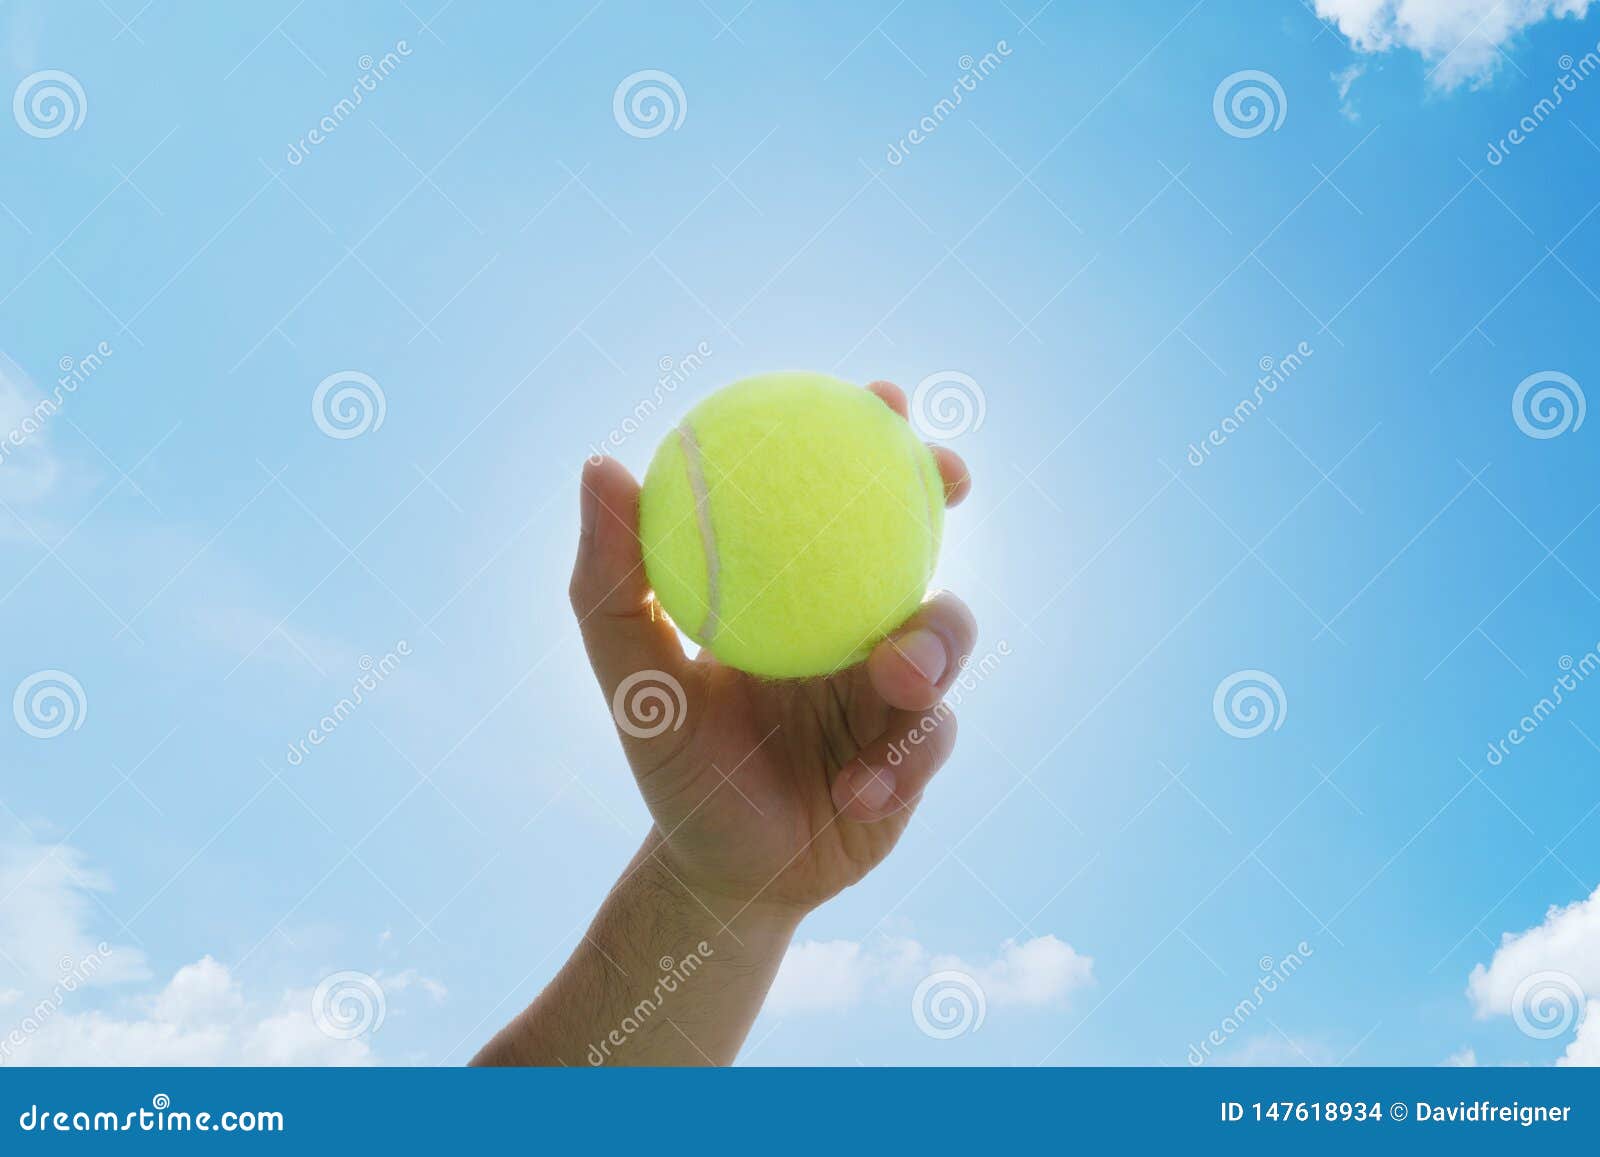 man holding and serving a yellow tennisball against blue sky. sports, competition and fitness concept